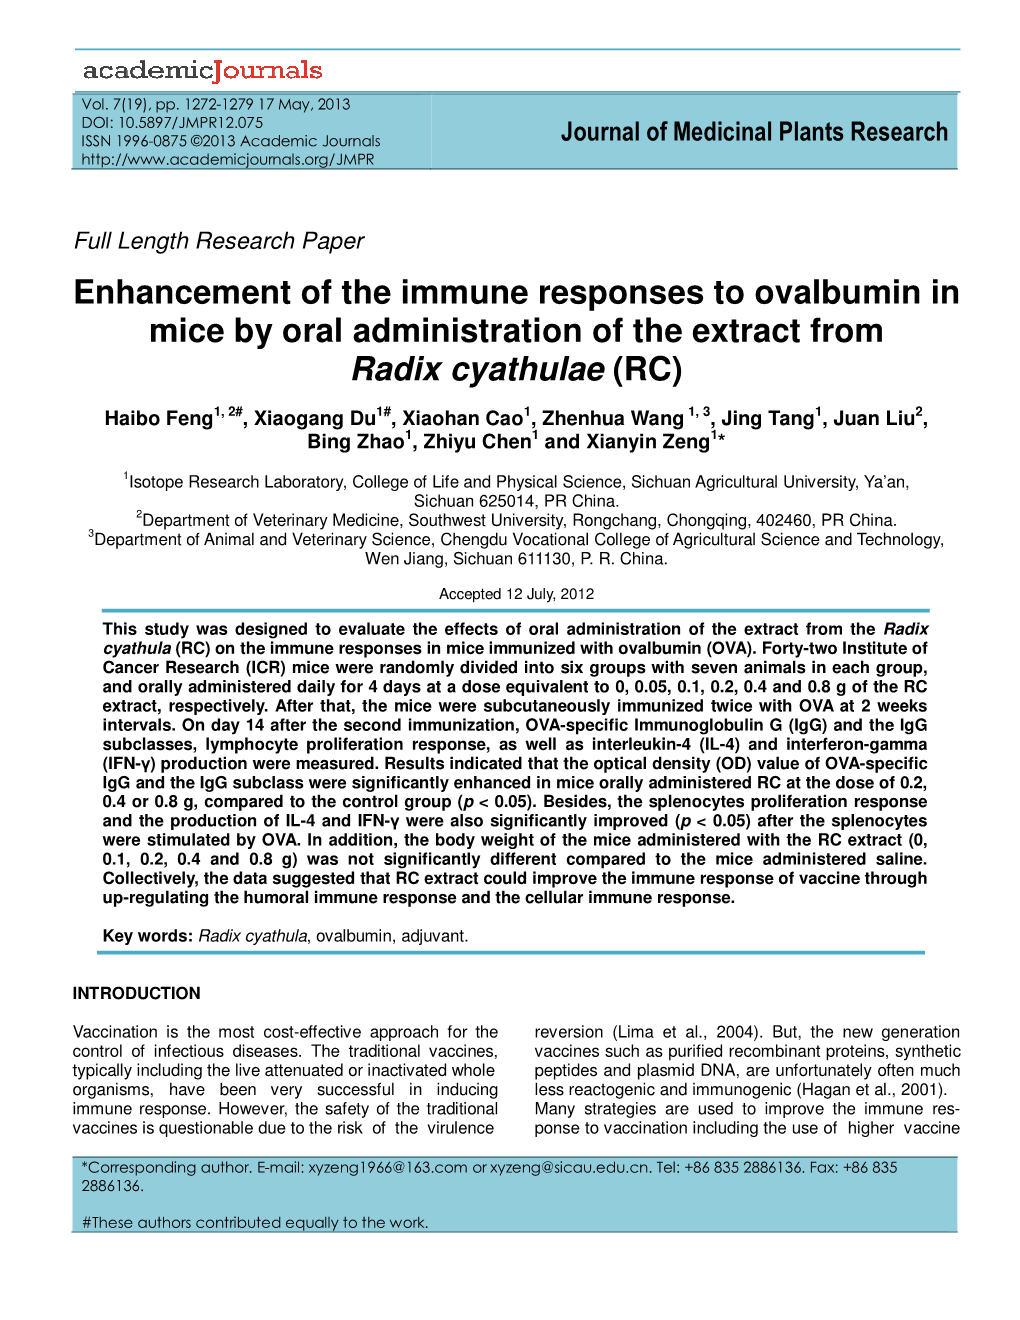 Enhancement of the Immune Responses to Ovalbumin in Mice by Oral Administration of the Extract from Radix Cyathulae (RC)